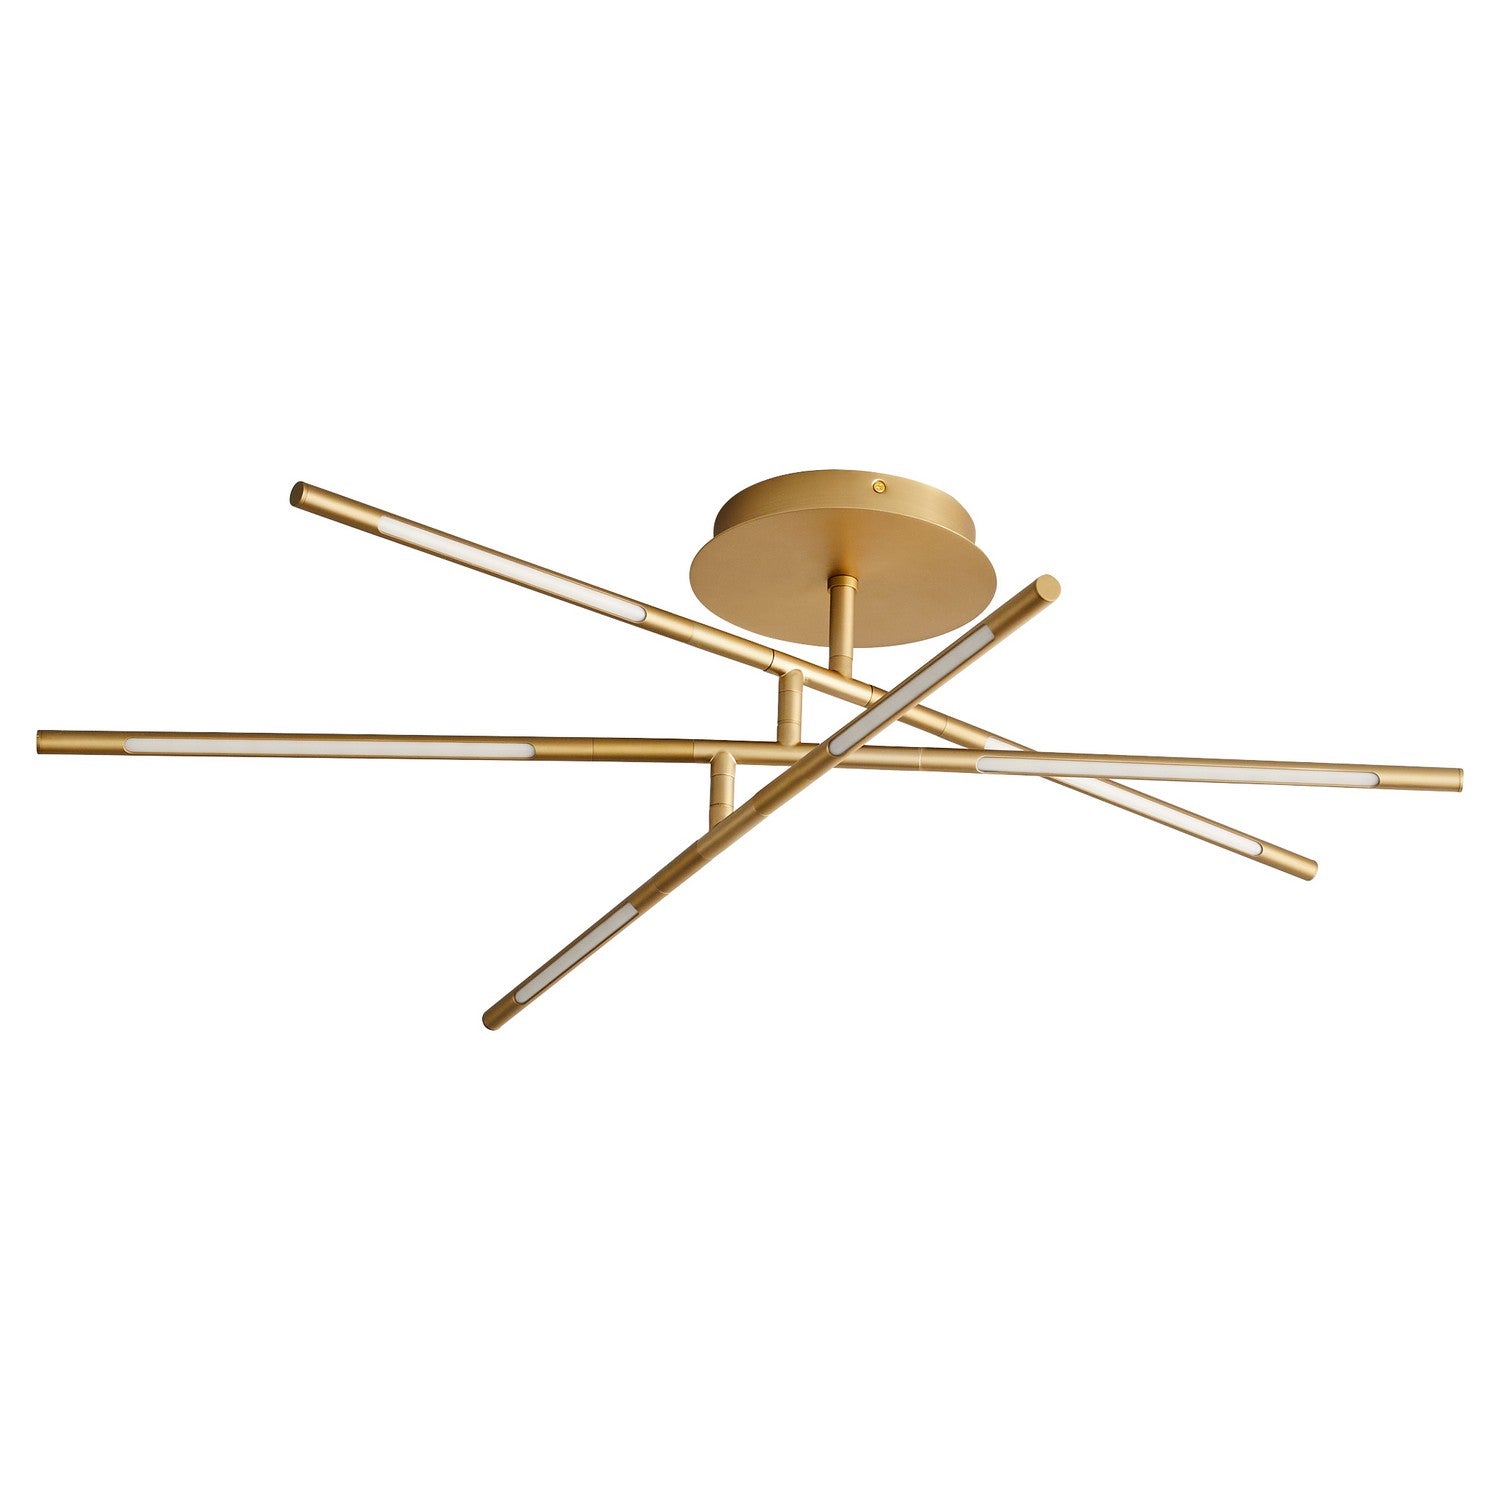 Oxygen Lighting - 3-805-40 - LED Ceiling Mount - Palillos - Aged Brass